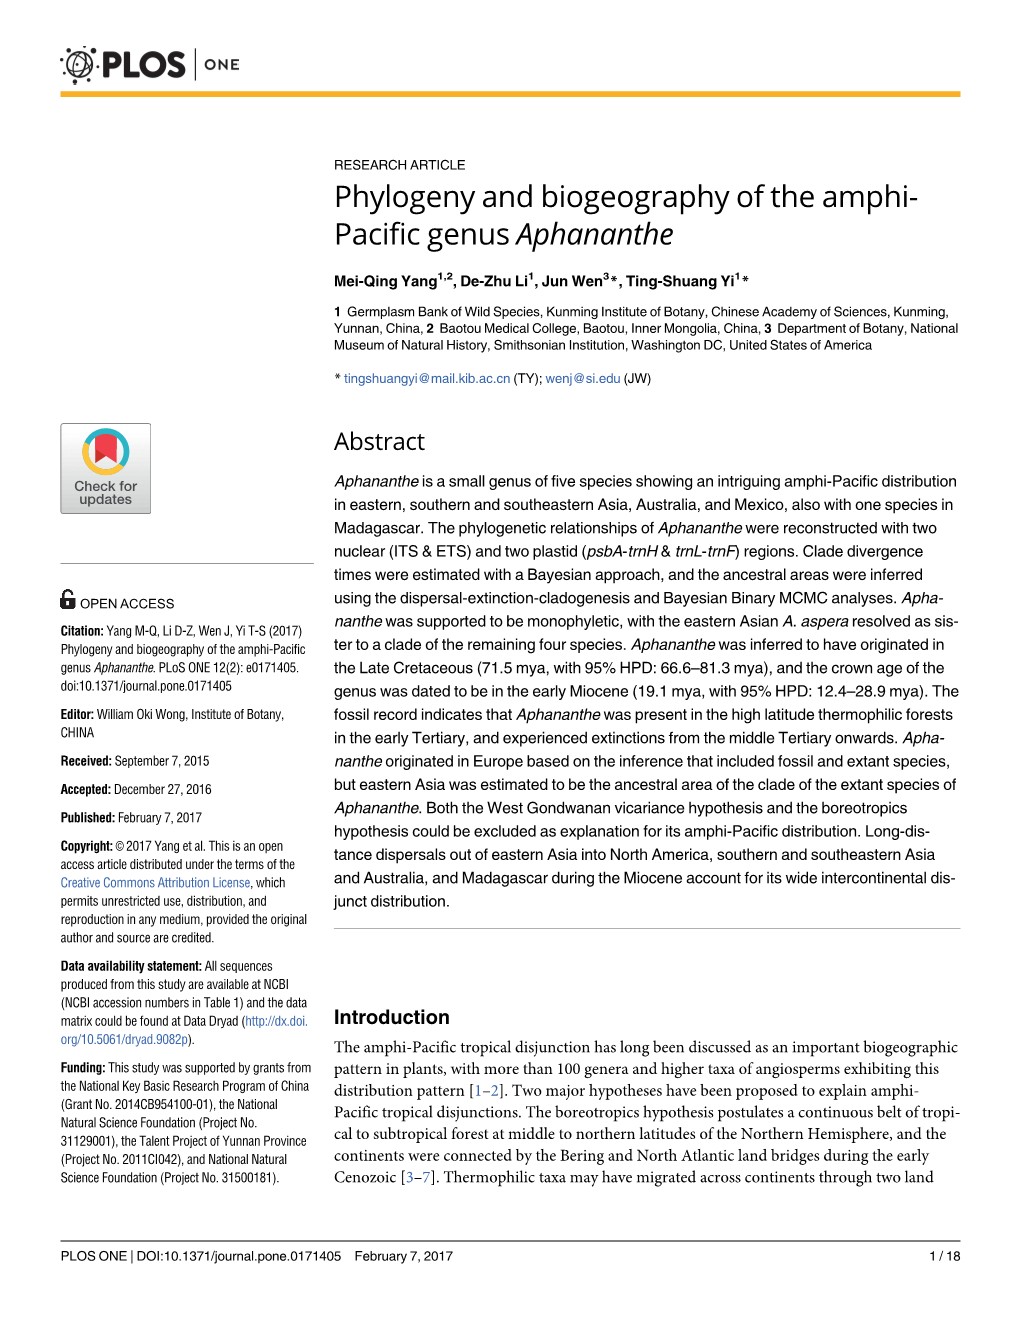 Phylogeny and Biogeography of the Amphi-Pacific Genus Aphananthe